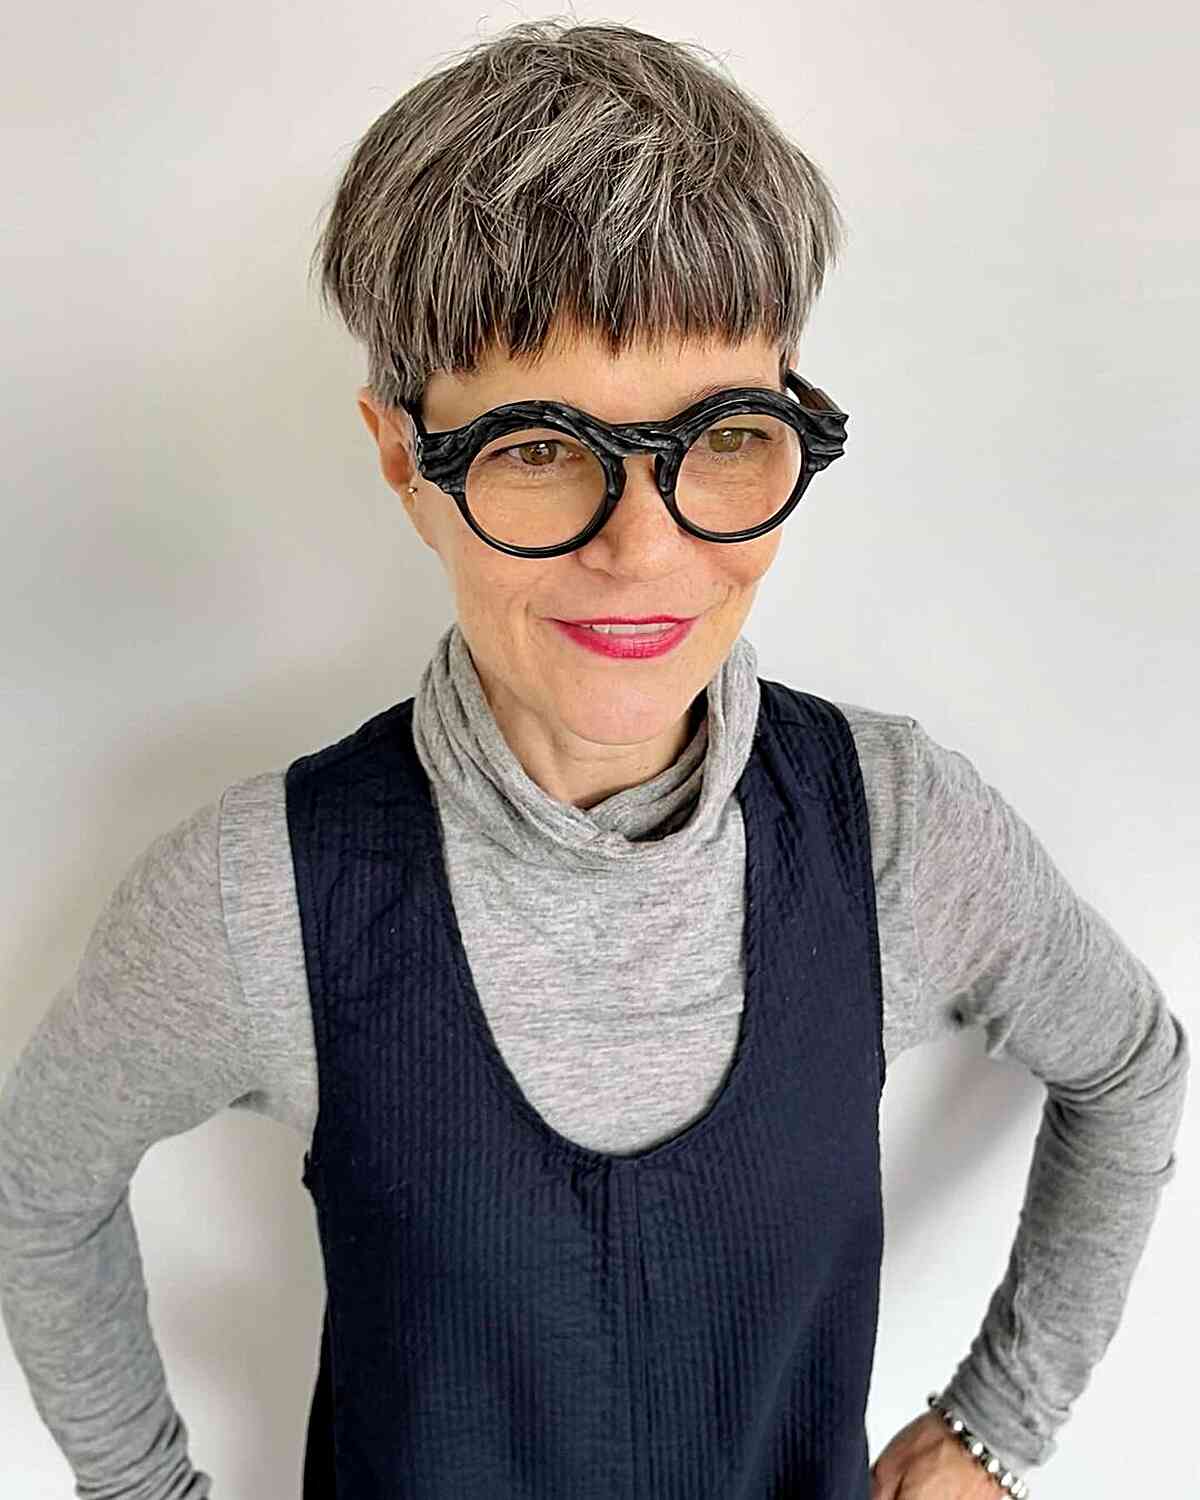 Short Grey Bowl Cut with Micro Bangs for women aged 60 with thicker locks